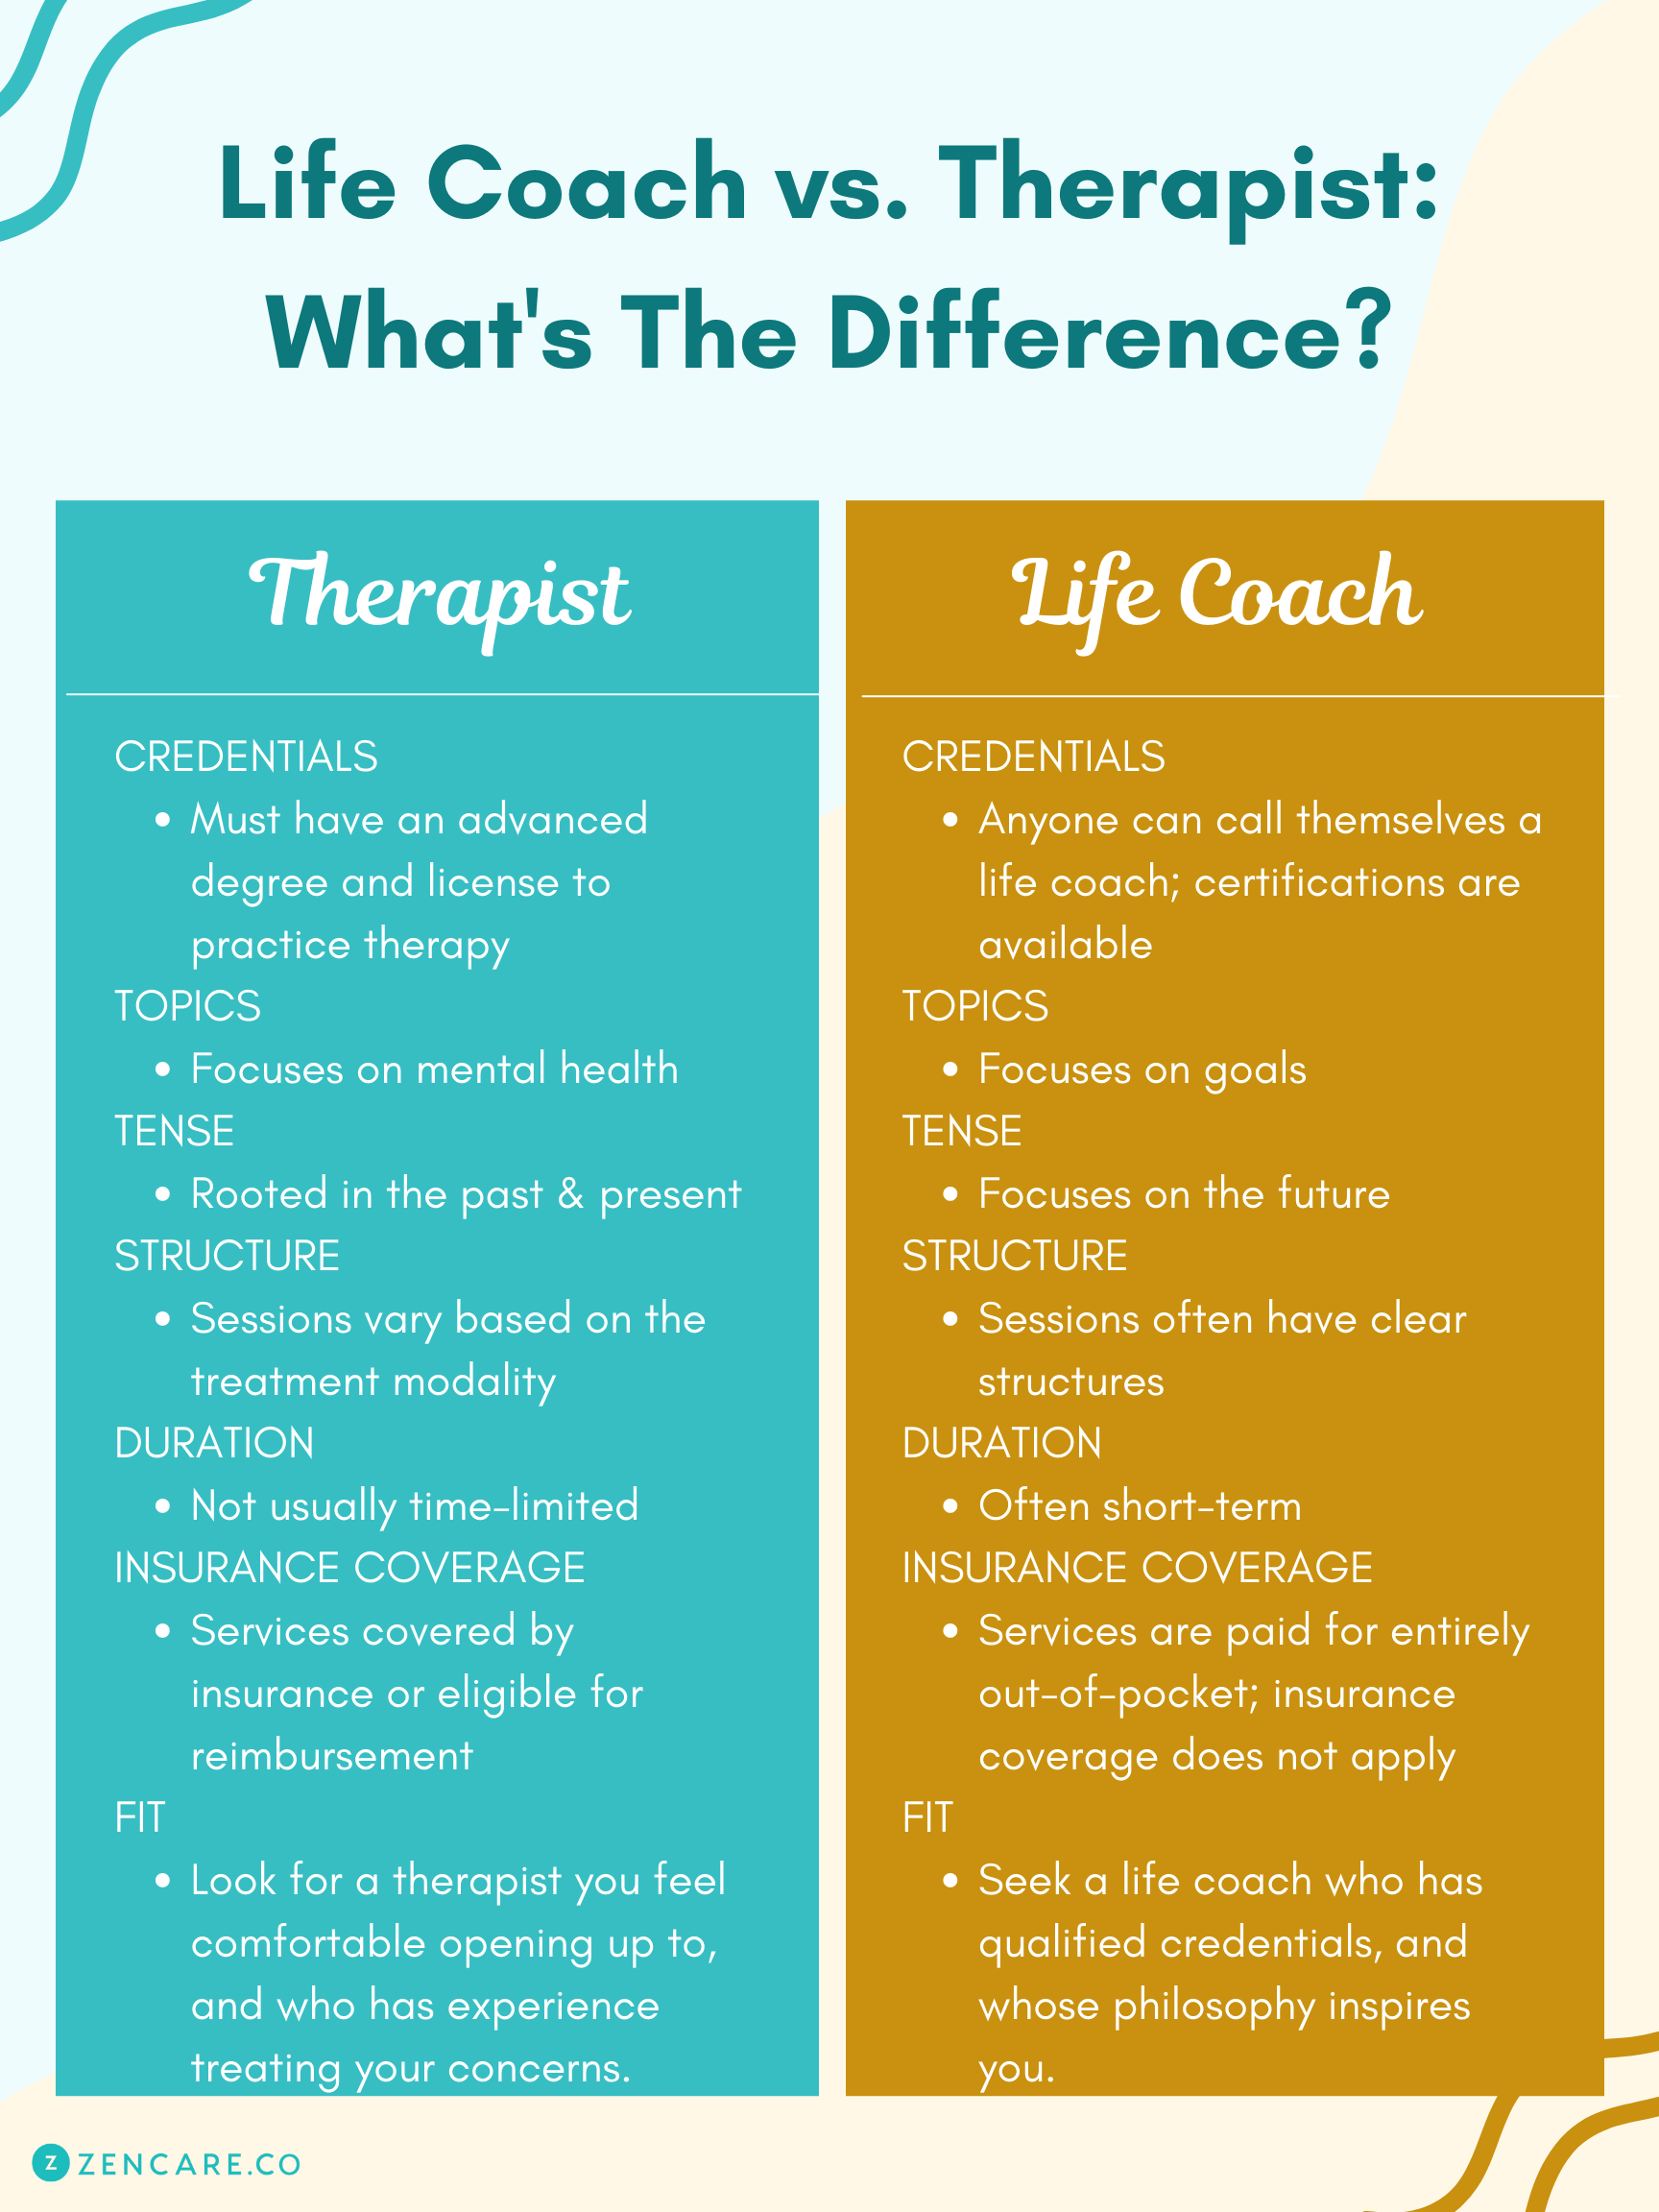 Life Coach vs. Therapist: What's The Difference?